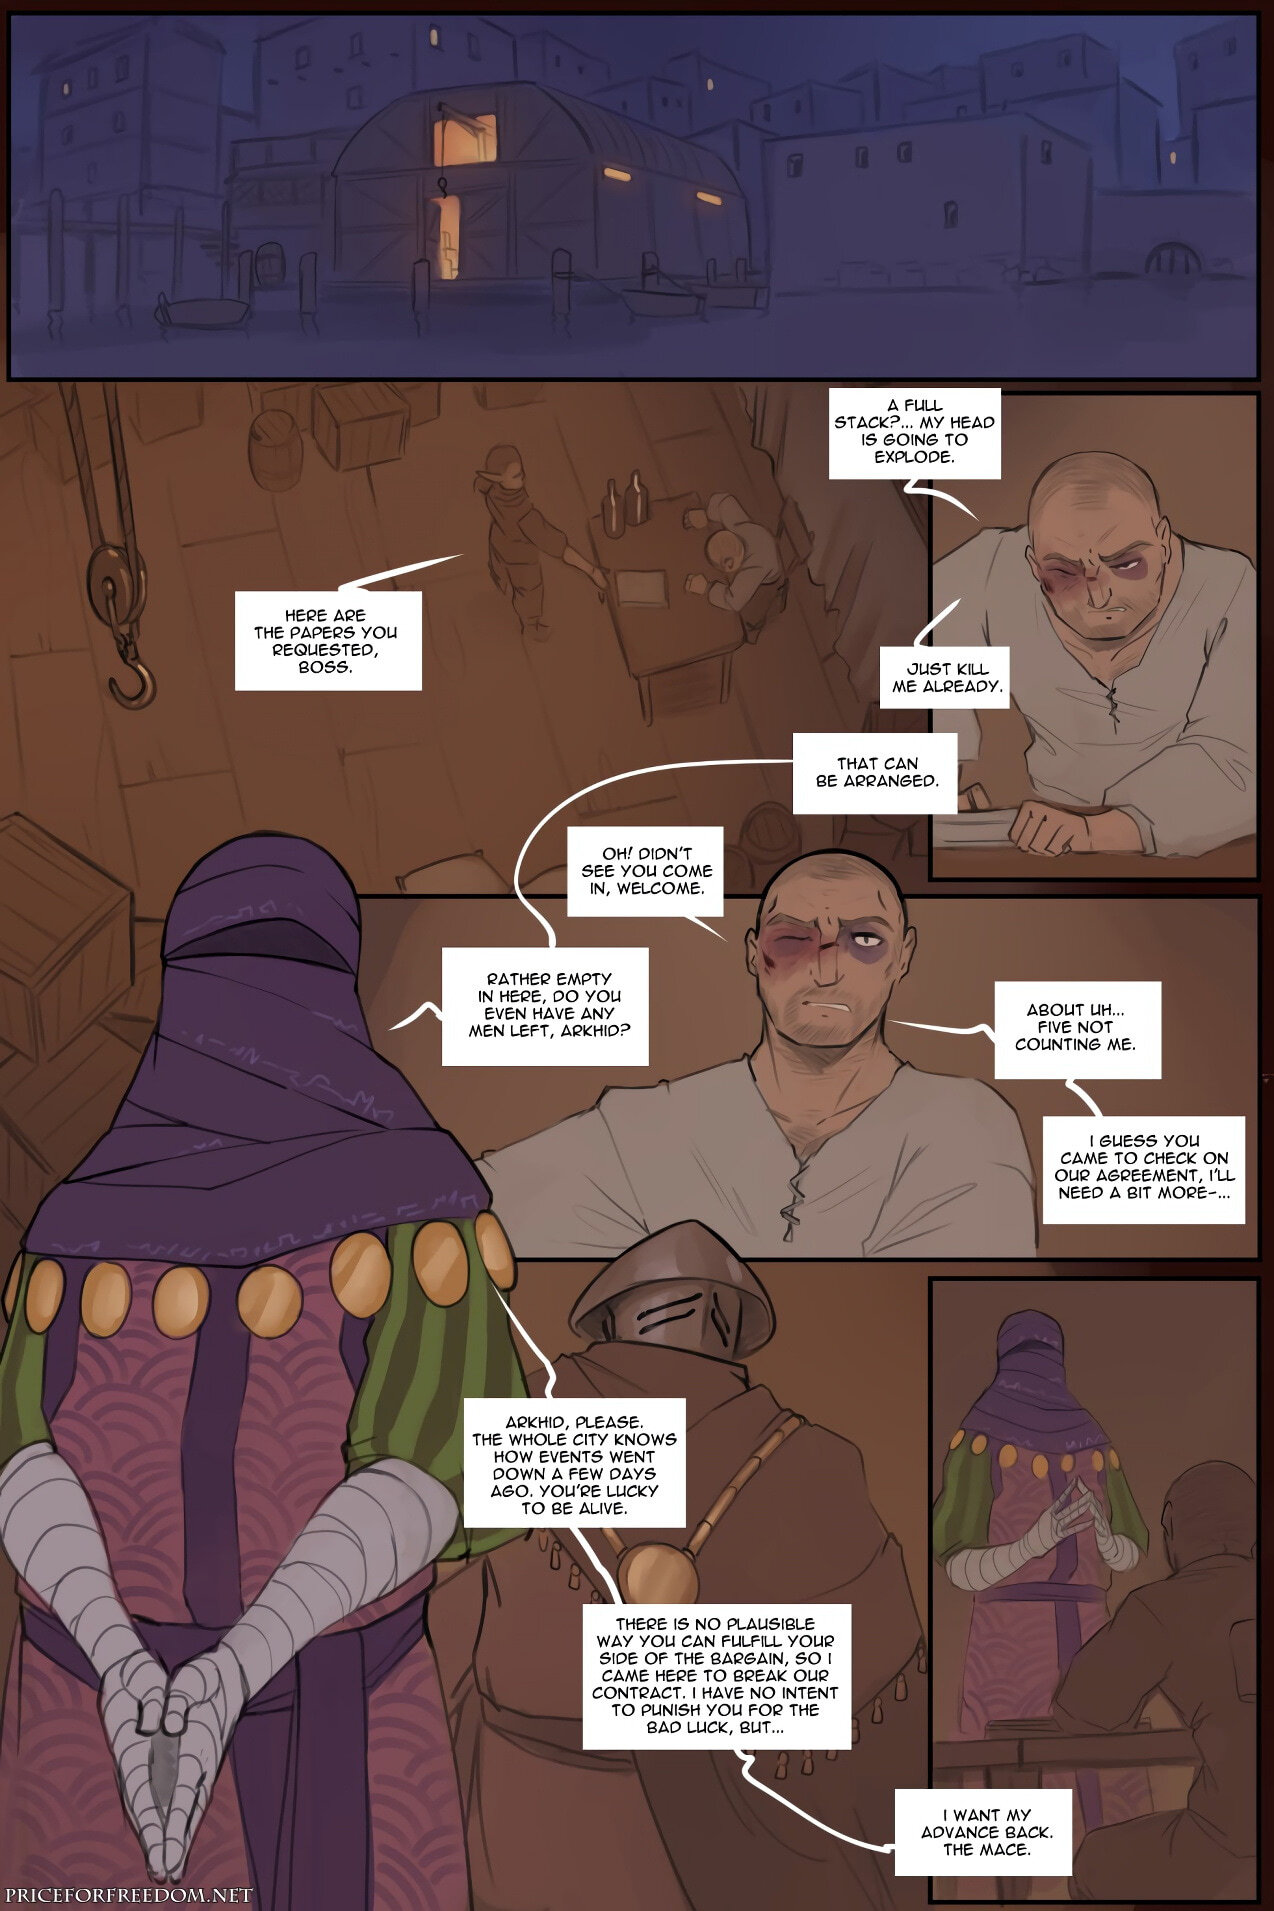 Price For Freedom - Page 349